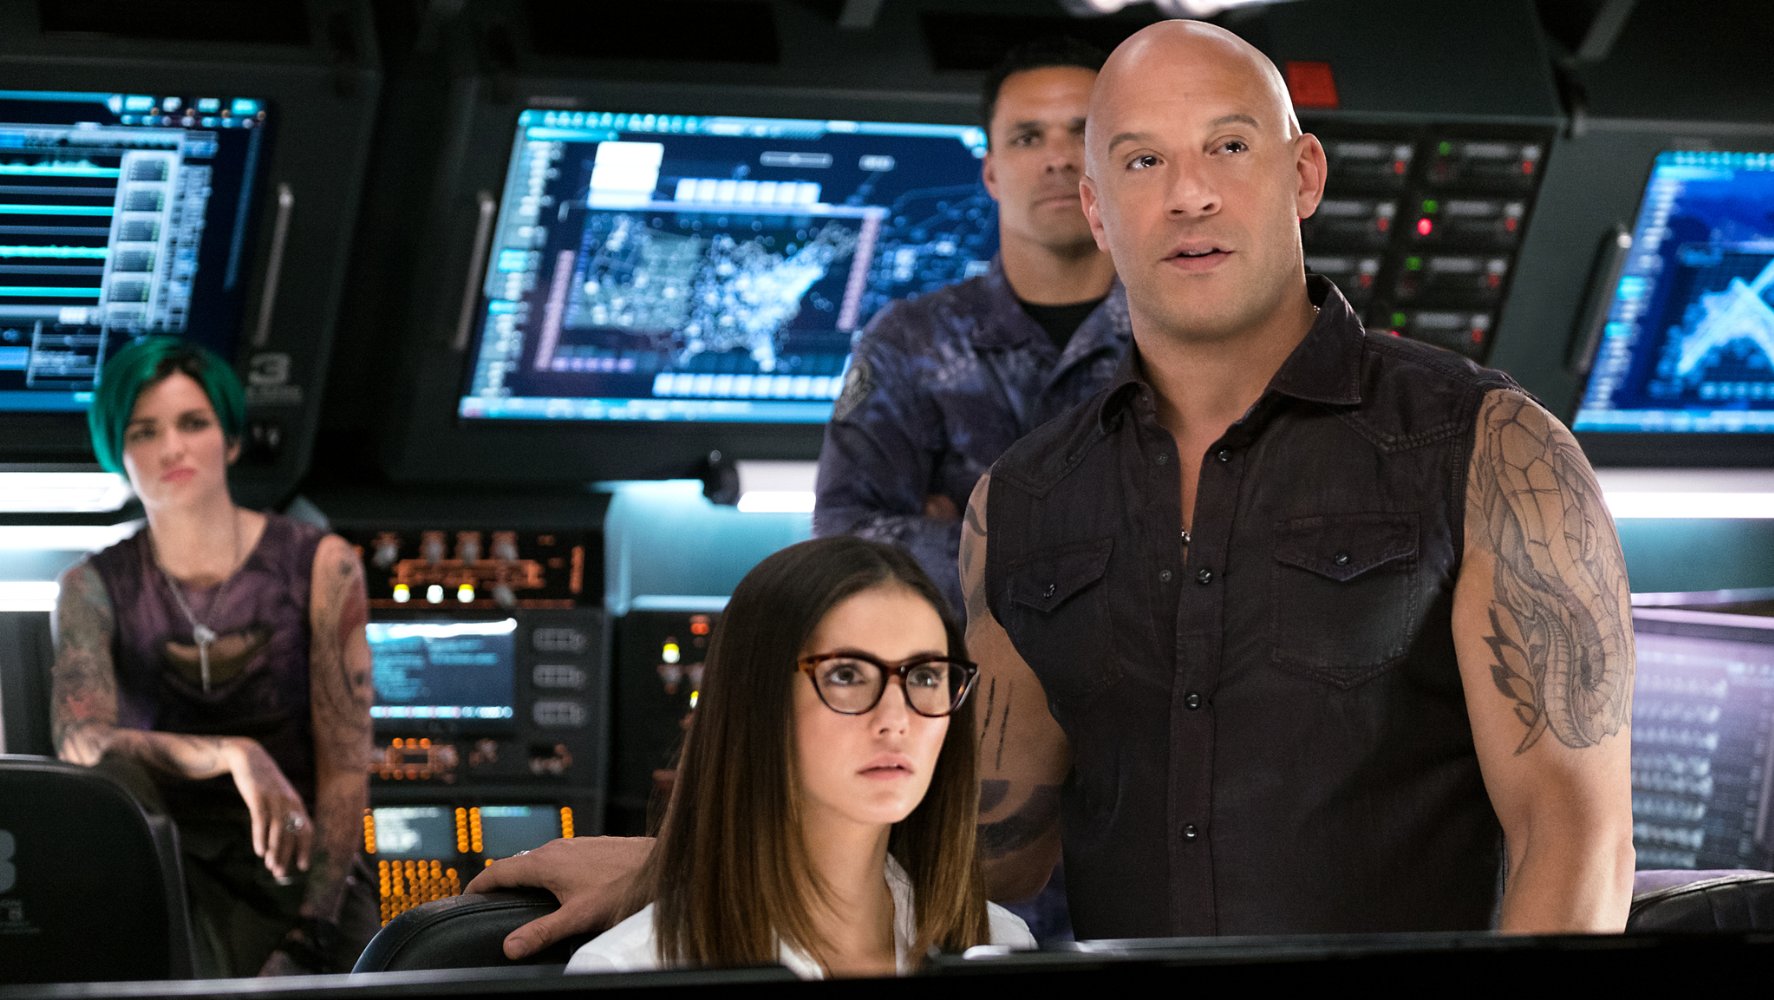 xXx: The Return of Xander Cage Feature Trailer